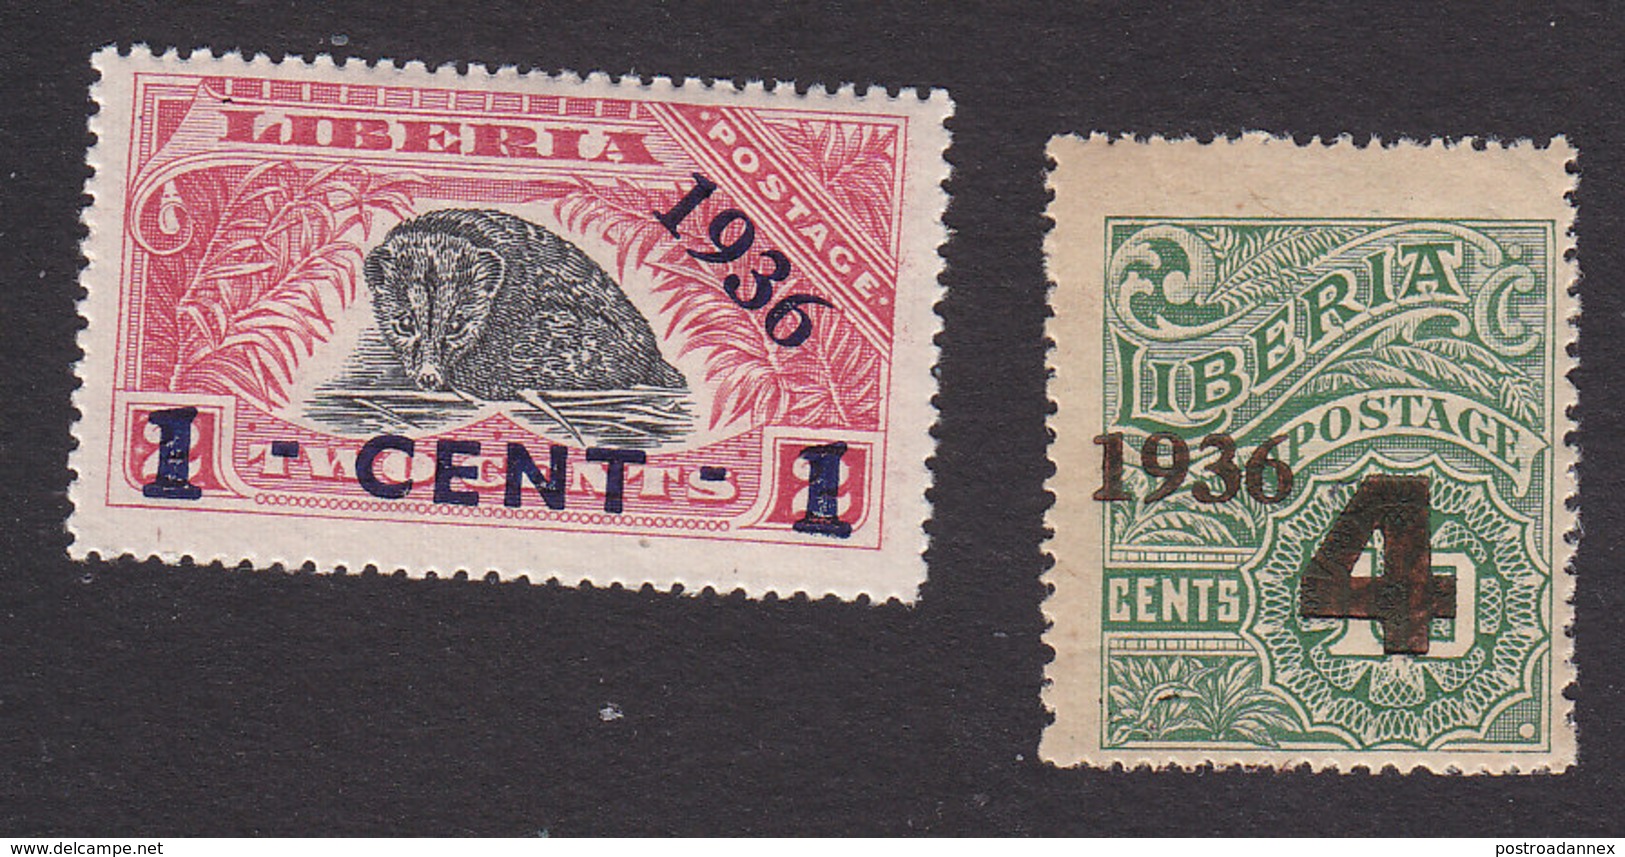 Liberia, Scott #248, 250, Mint Hinged/No Gum, Palm-Civet And Number Surcharged, Issued 1936 - Liberia